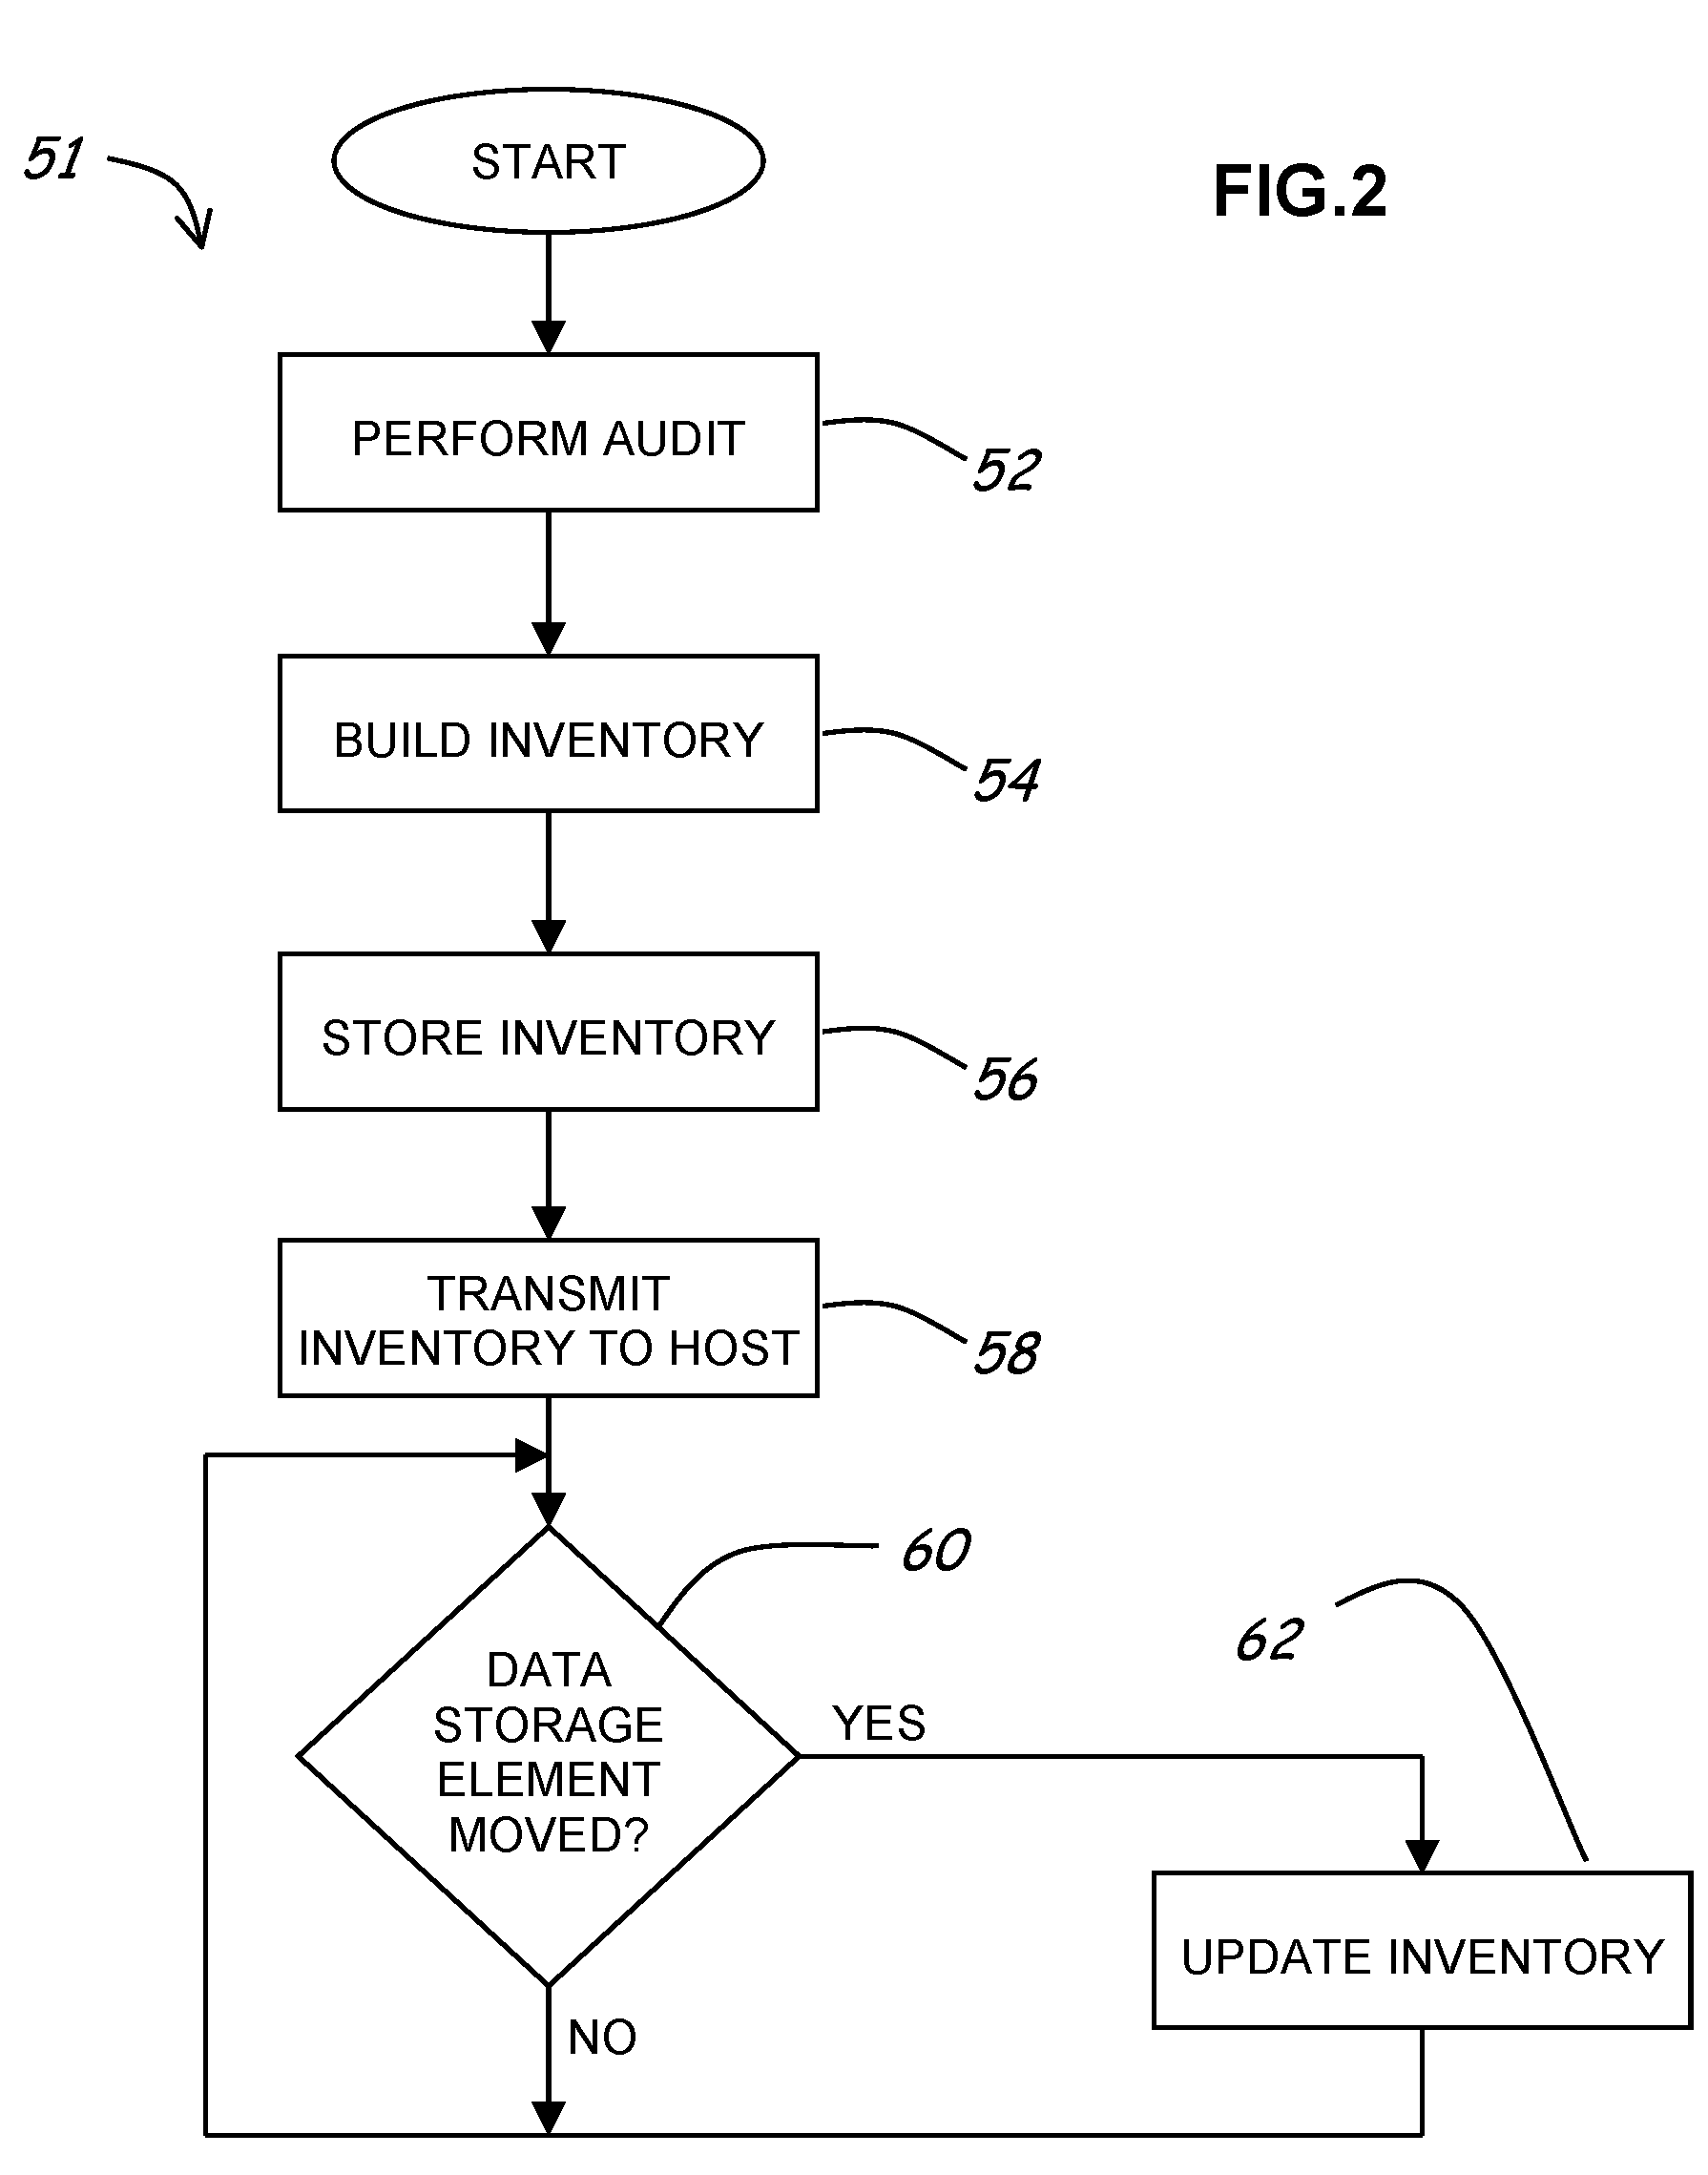 Robotic Data Storage Library With the Ability to Reduce the Transition Time to Reach an Operational State After a Transition From a Power-Off State to a Power-On State